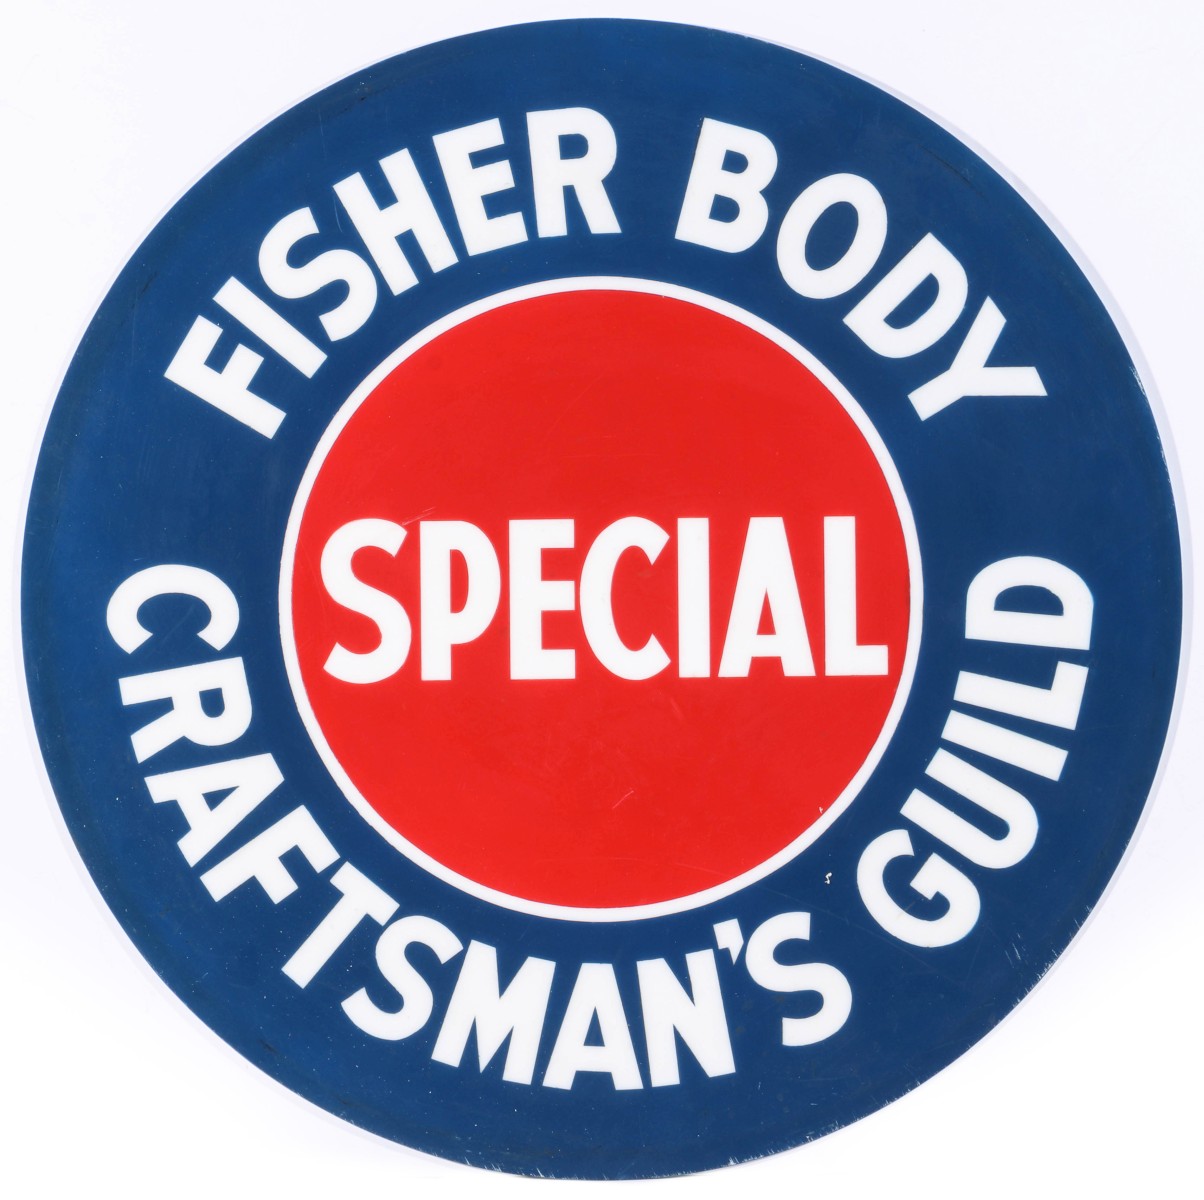 FISHER BODY CRAFTSMAN'S GUILD SPECIAL TRAIN SIGN LENS